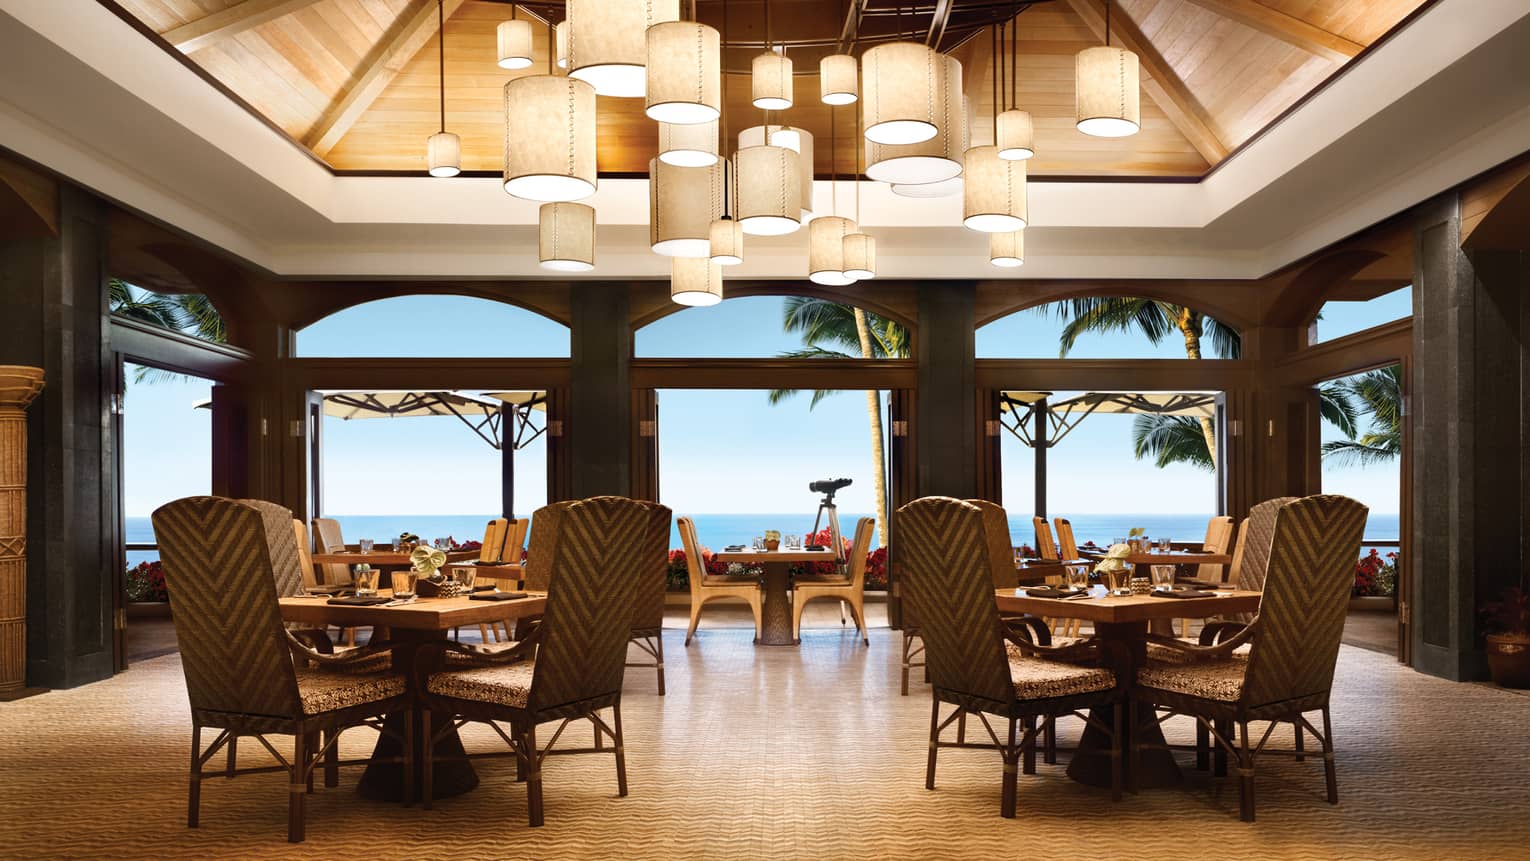 Views Restaurant dining room, tables and chairs under vaulted ceilings with modern lanterns